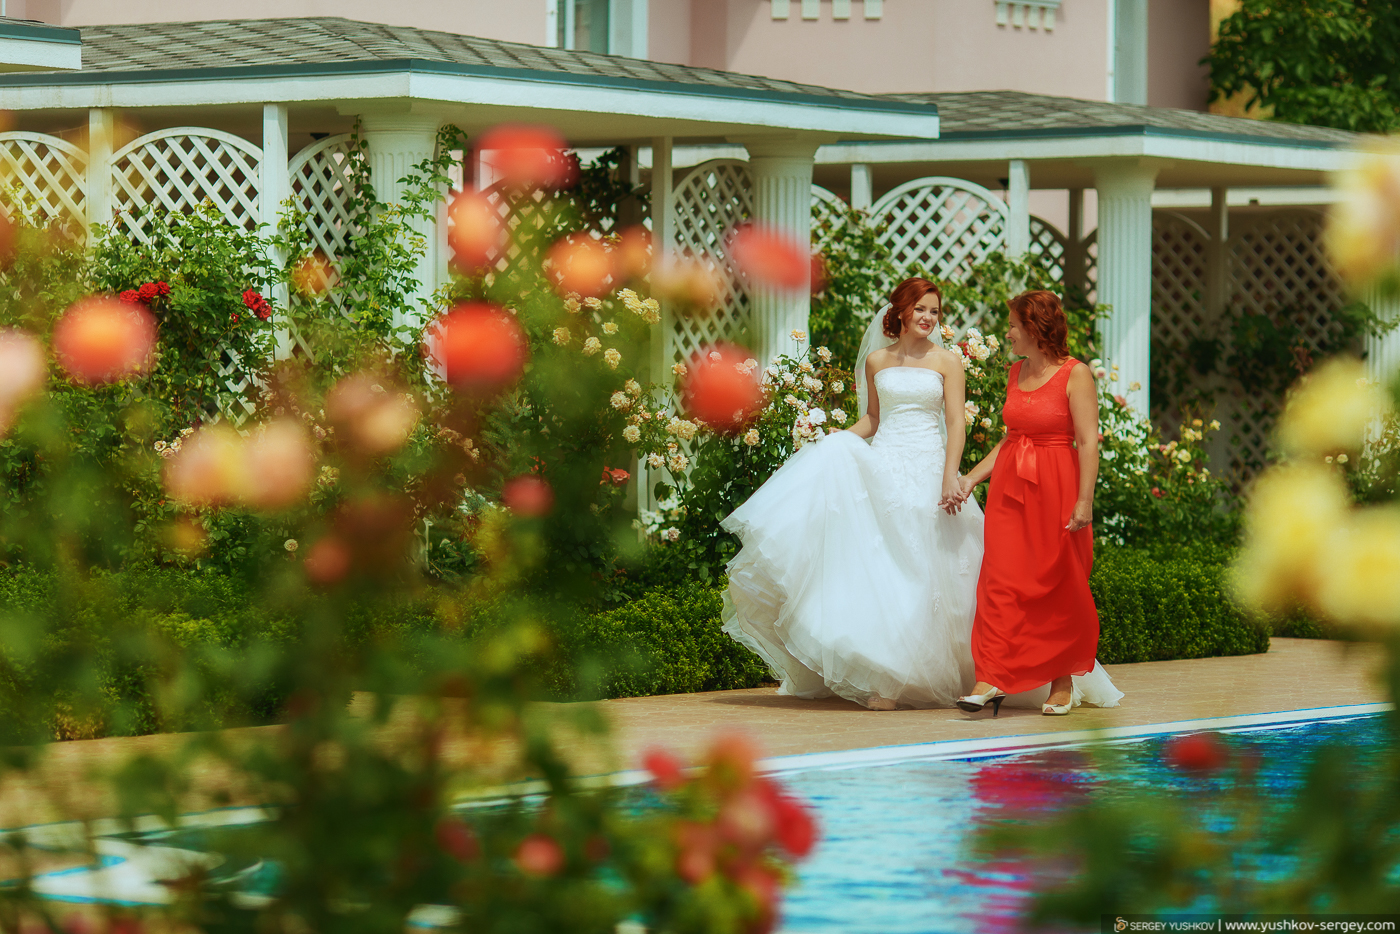 Wedding photosession “For two” in Crimea. Yulia and Yulian.